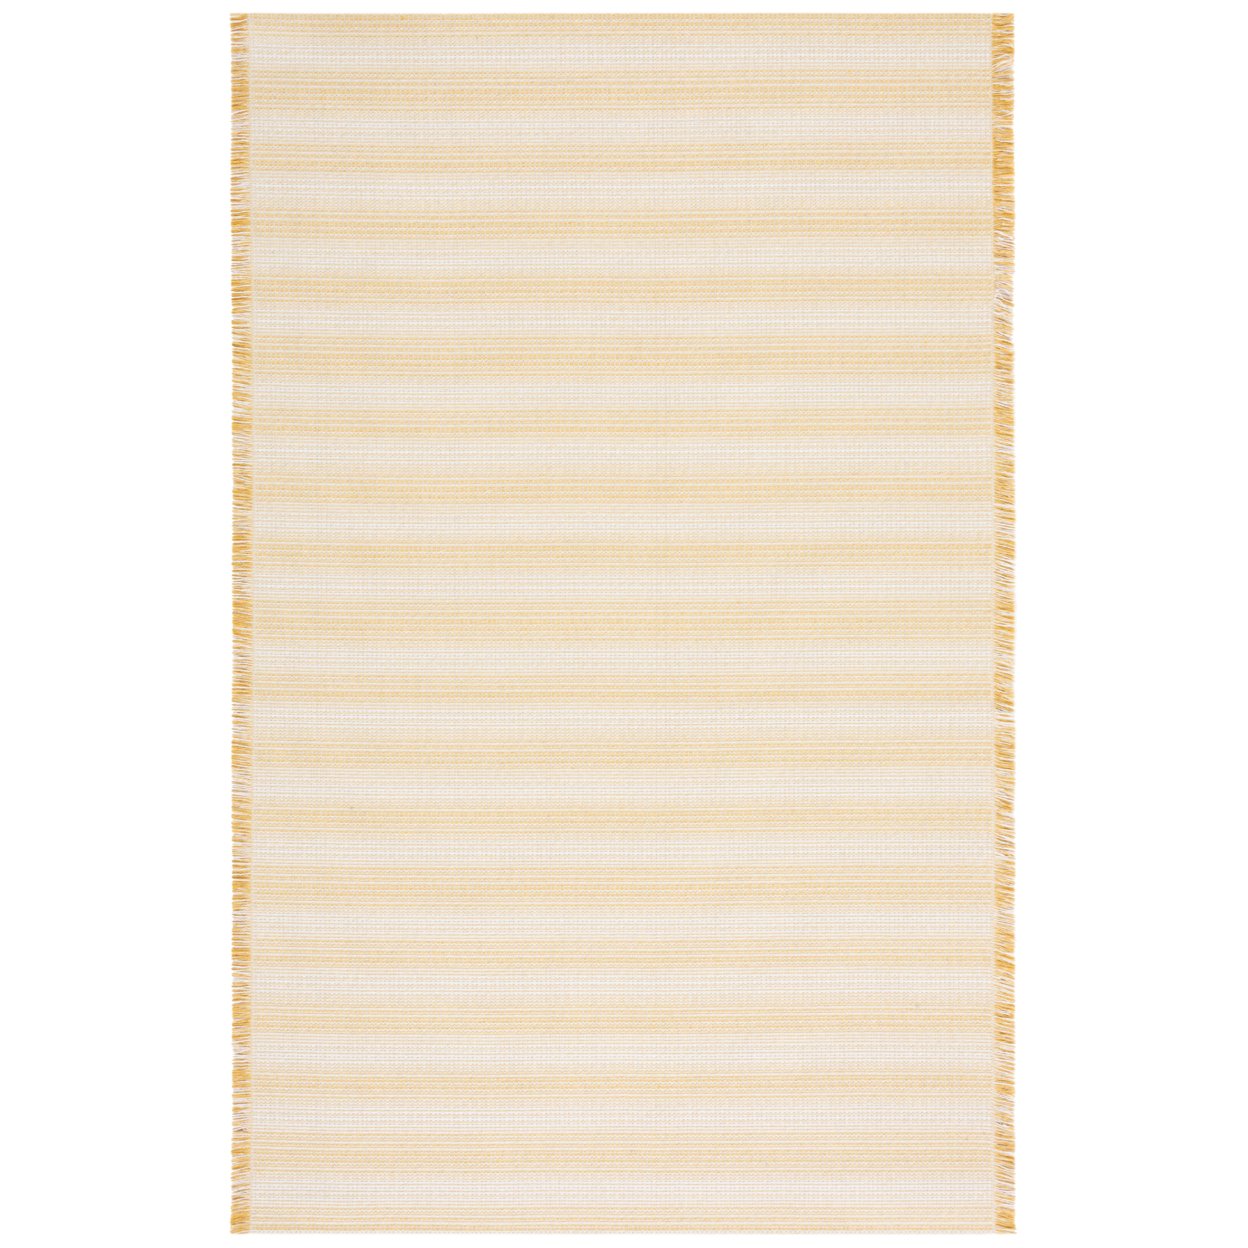 Safavieh AGT501C Augustine 500 Ivory / Yellow - Charcoal / Ivory, 6'-4 X 6'-4square